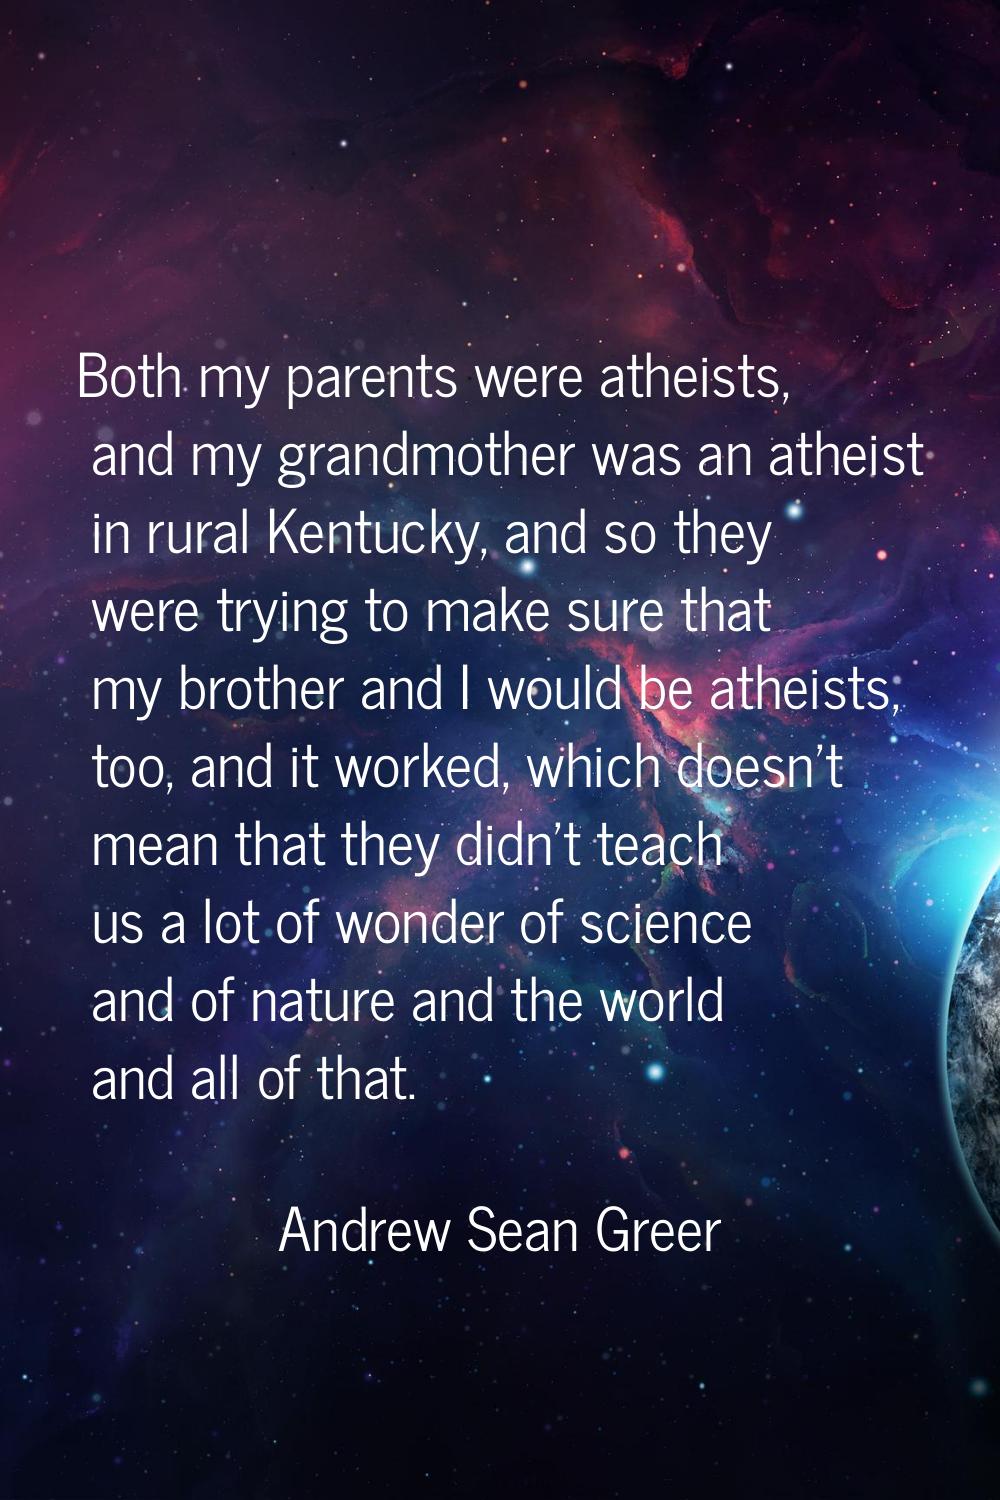 Both my parents were atheists, and my grandmother was an atheist in rural Kentucky, and so they wer